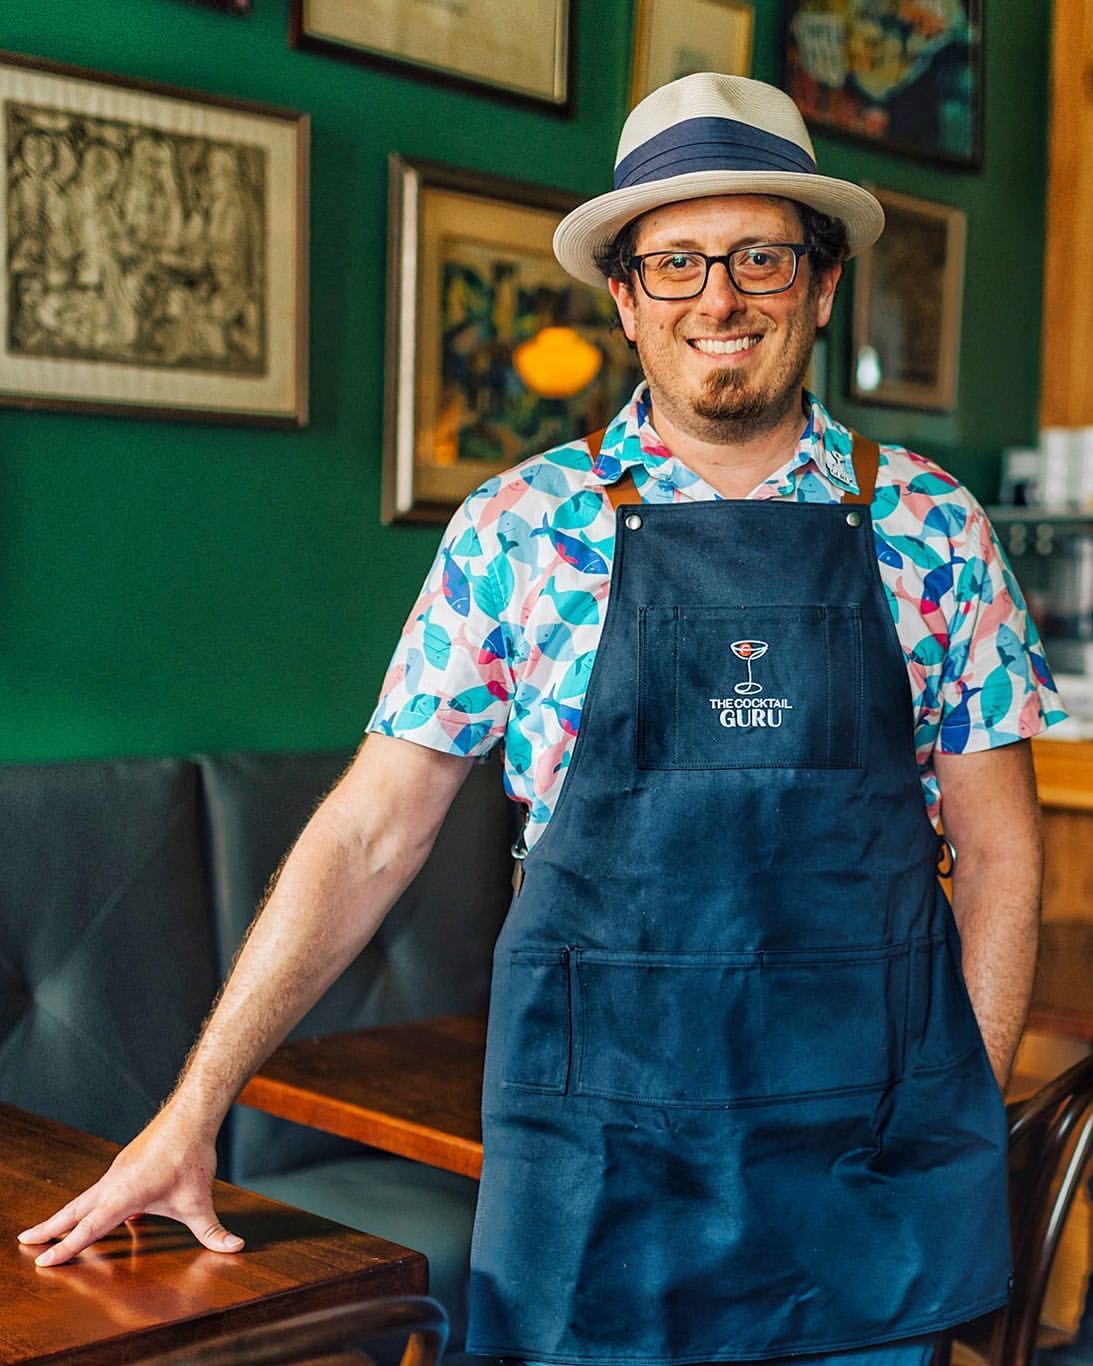 The Cocktail Guru standing in a bar with a blue canvas apron.